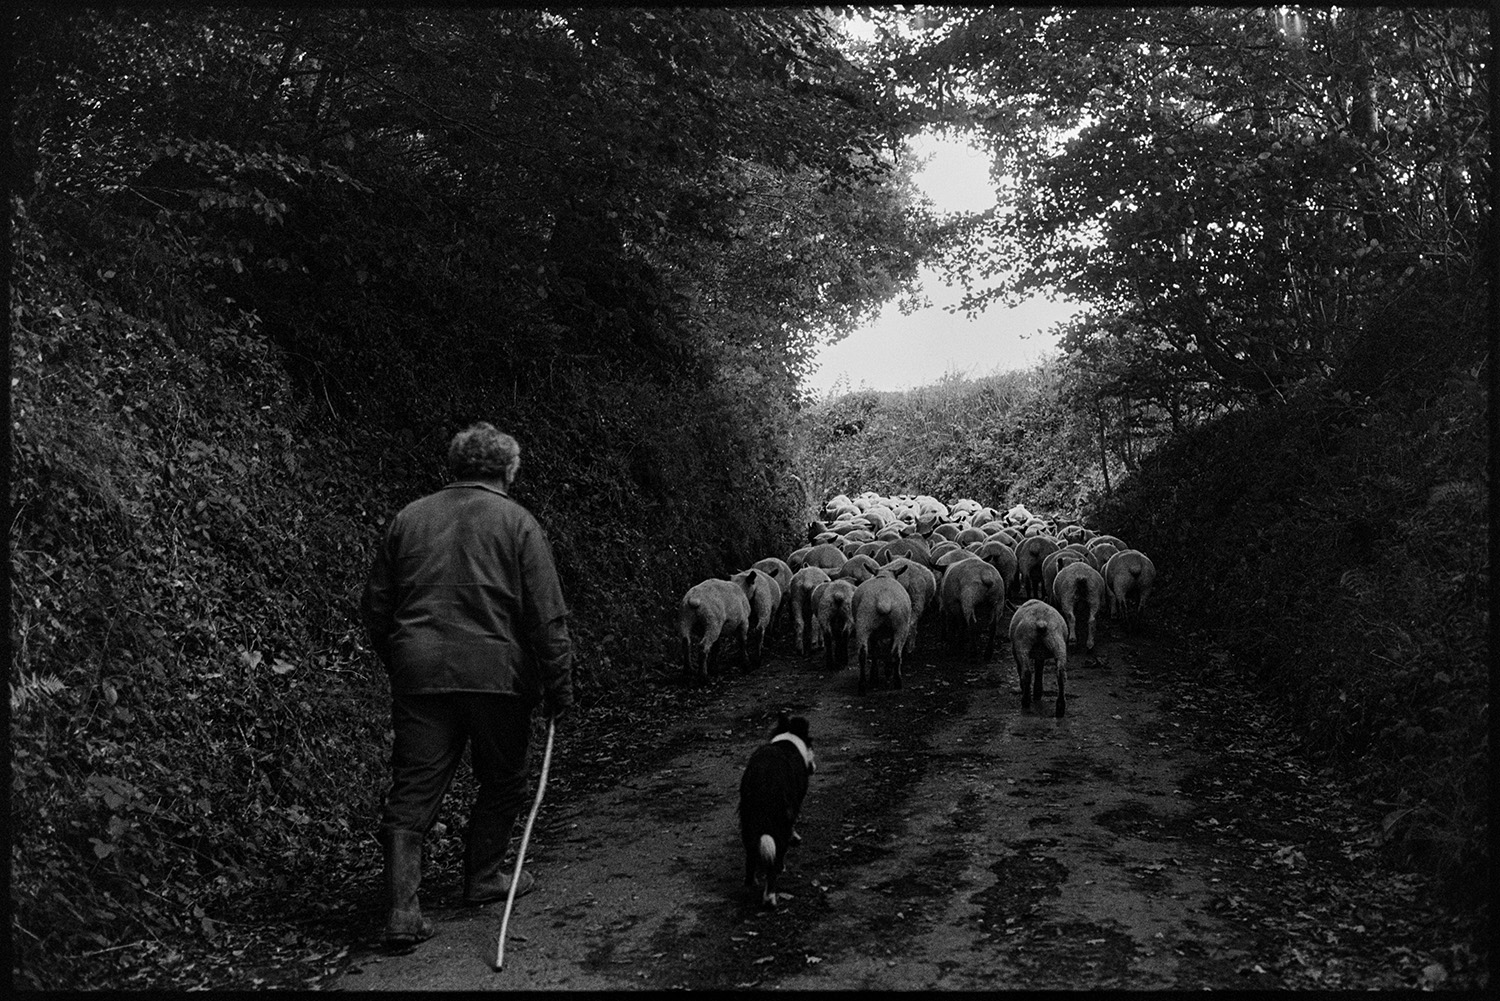 Farmer taking flock of sheep down lane. 
[John Squire and a dog herding a flock of sheep along a tree lined lane at Millhams, Dolton.]